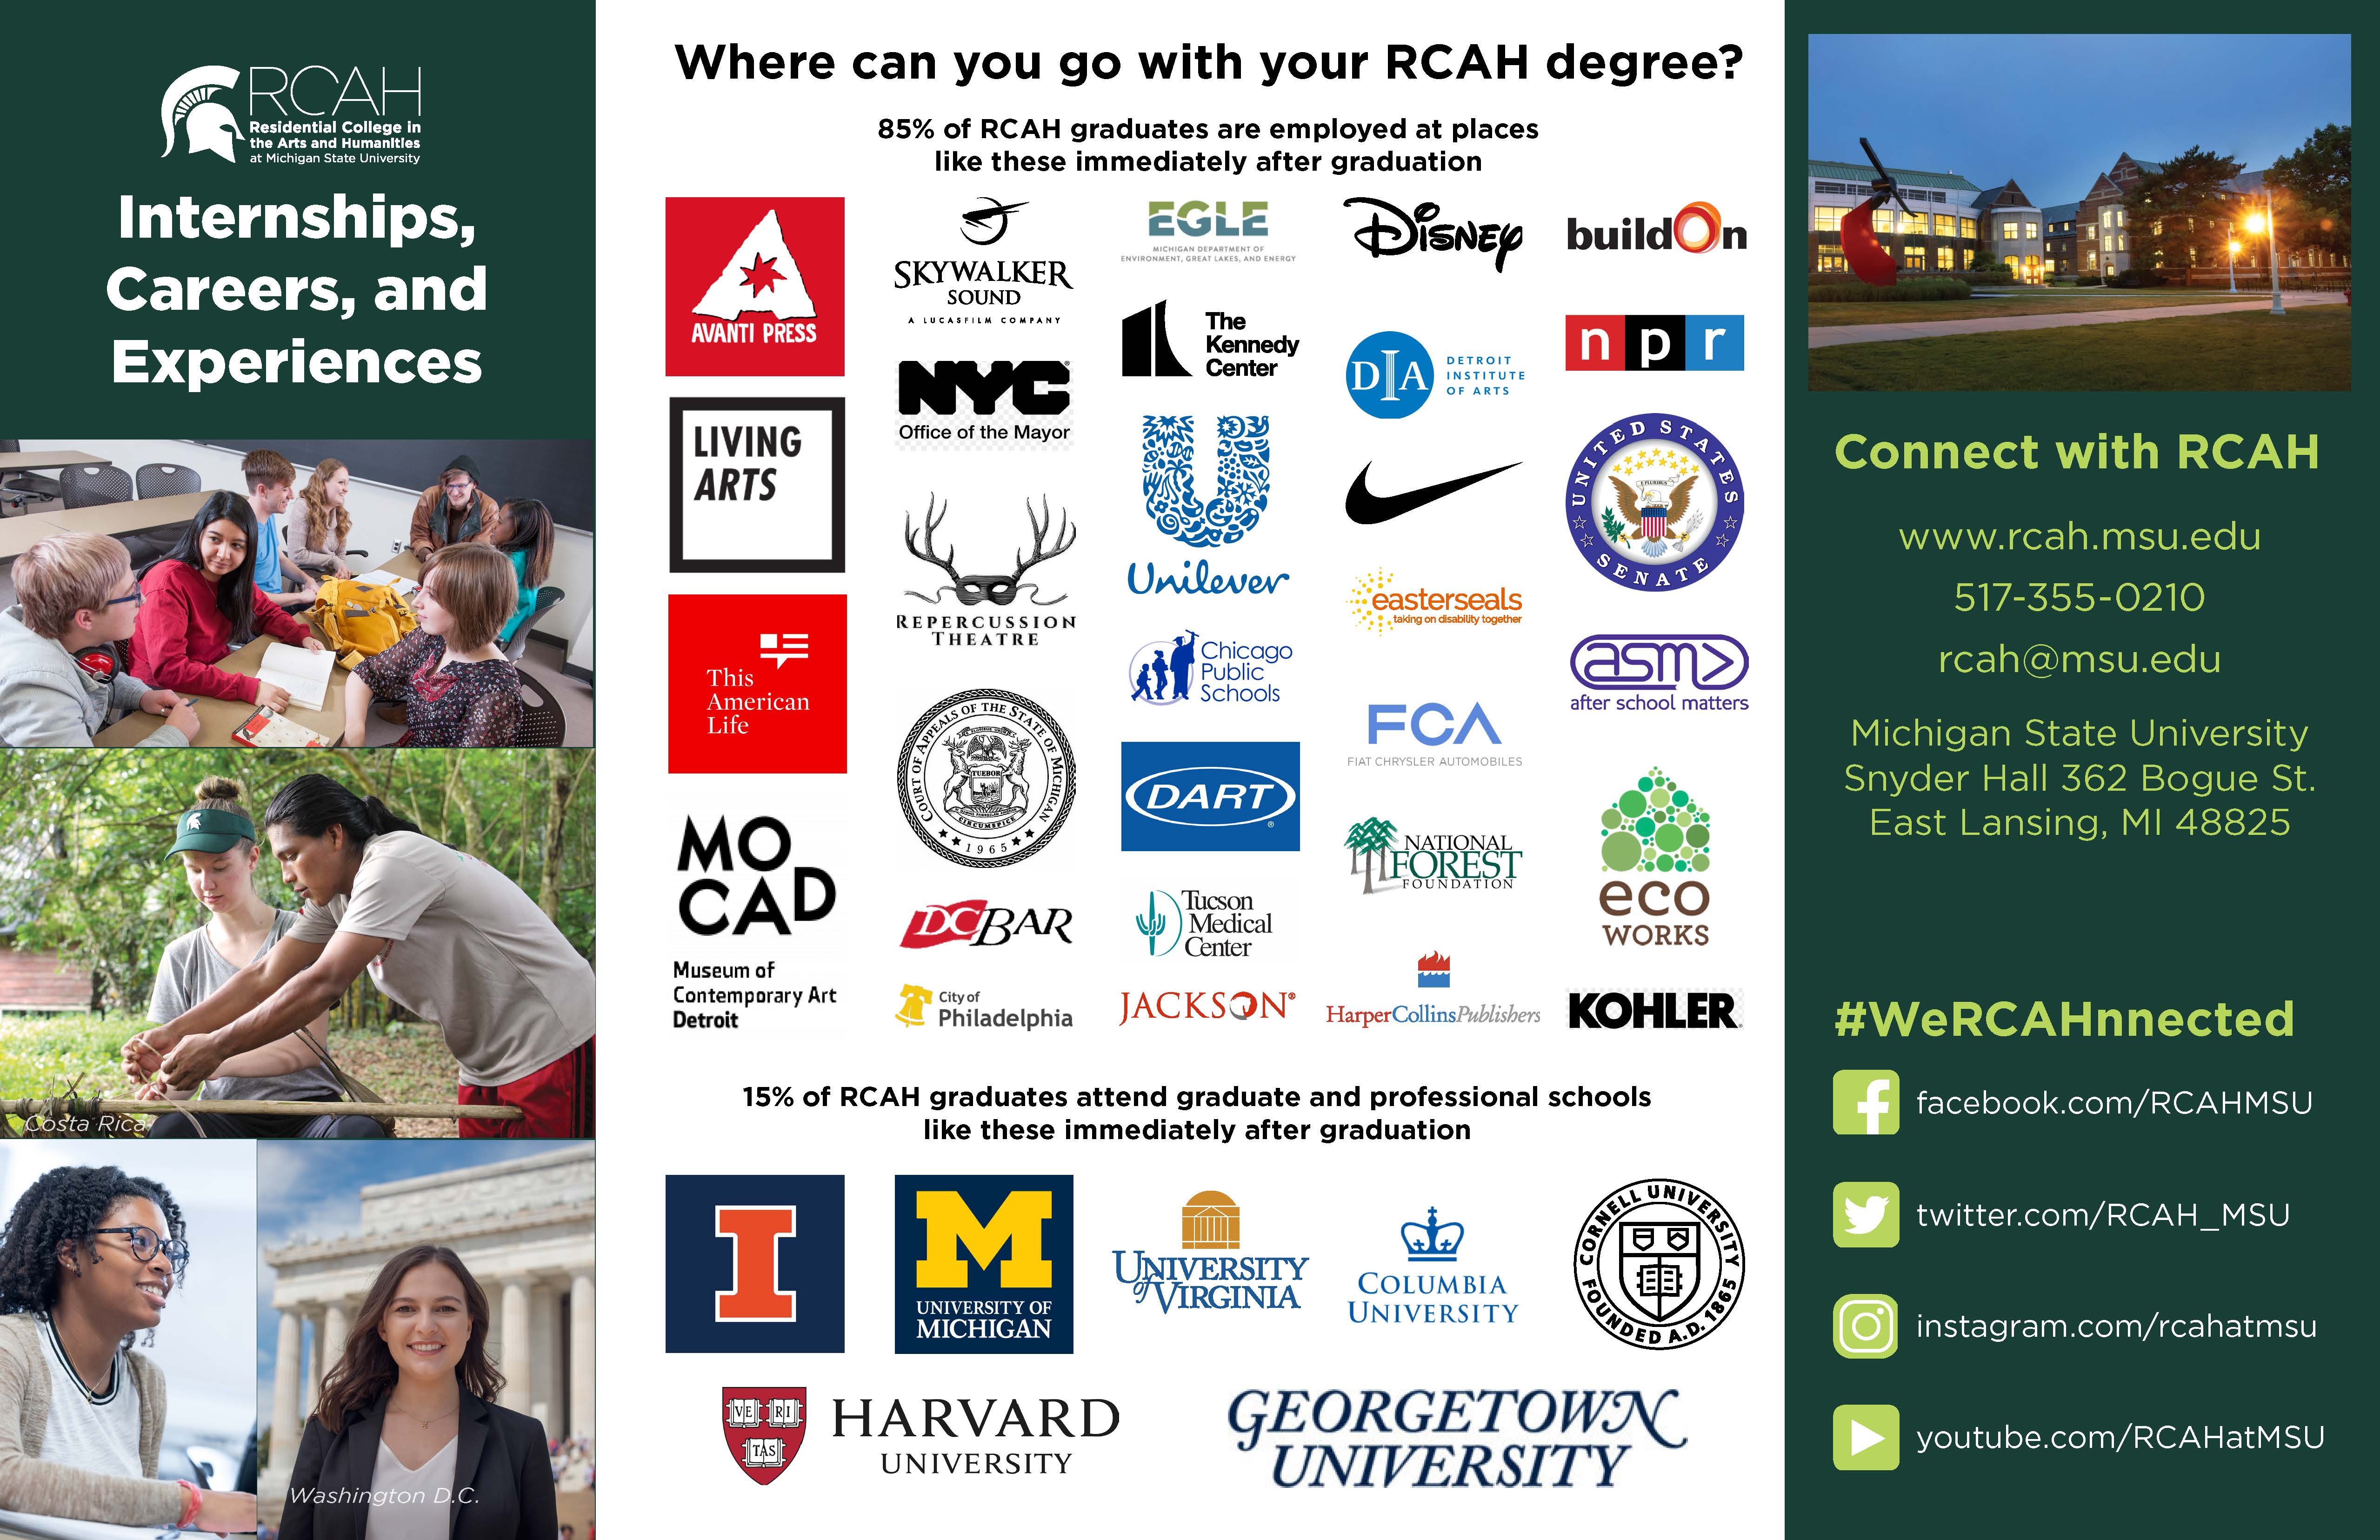 Image is the front page of the career guide, showing some pictures of RCAH students, logos of businesses where RCAH students/alums have worked, and contact information for RCAH.